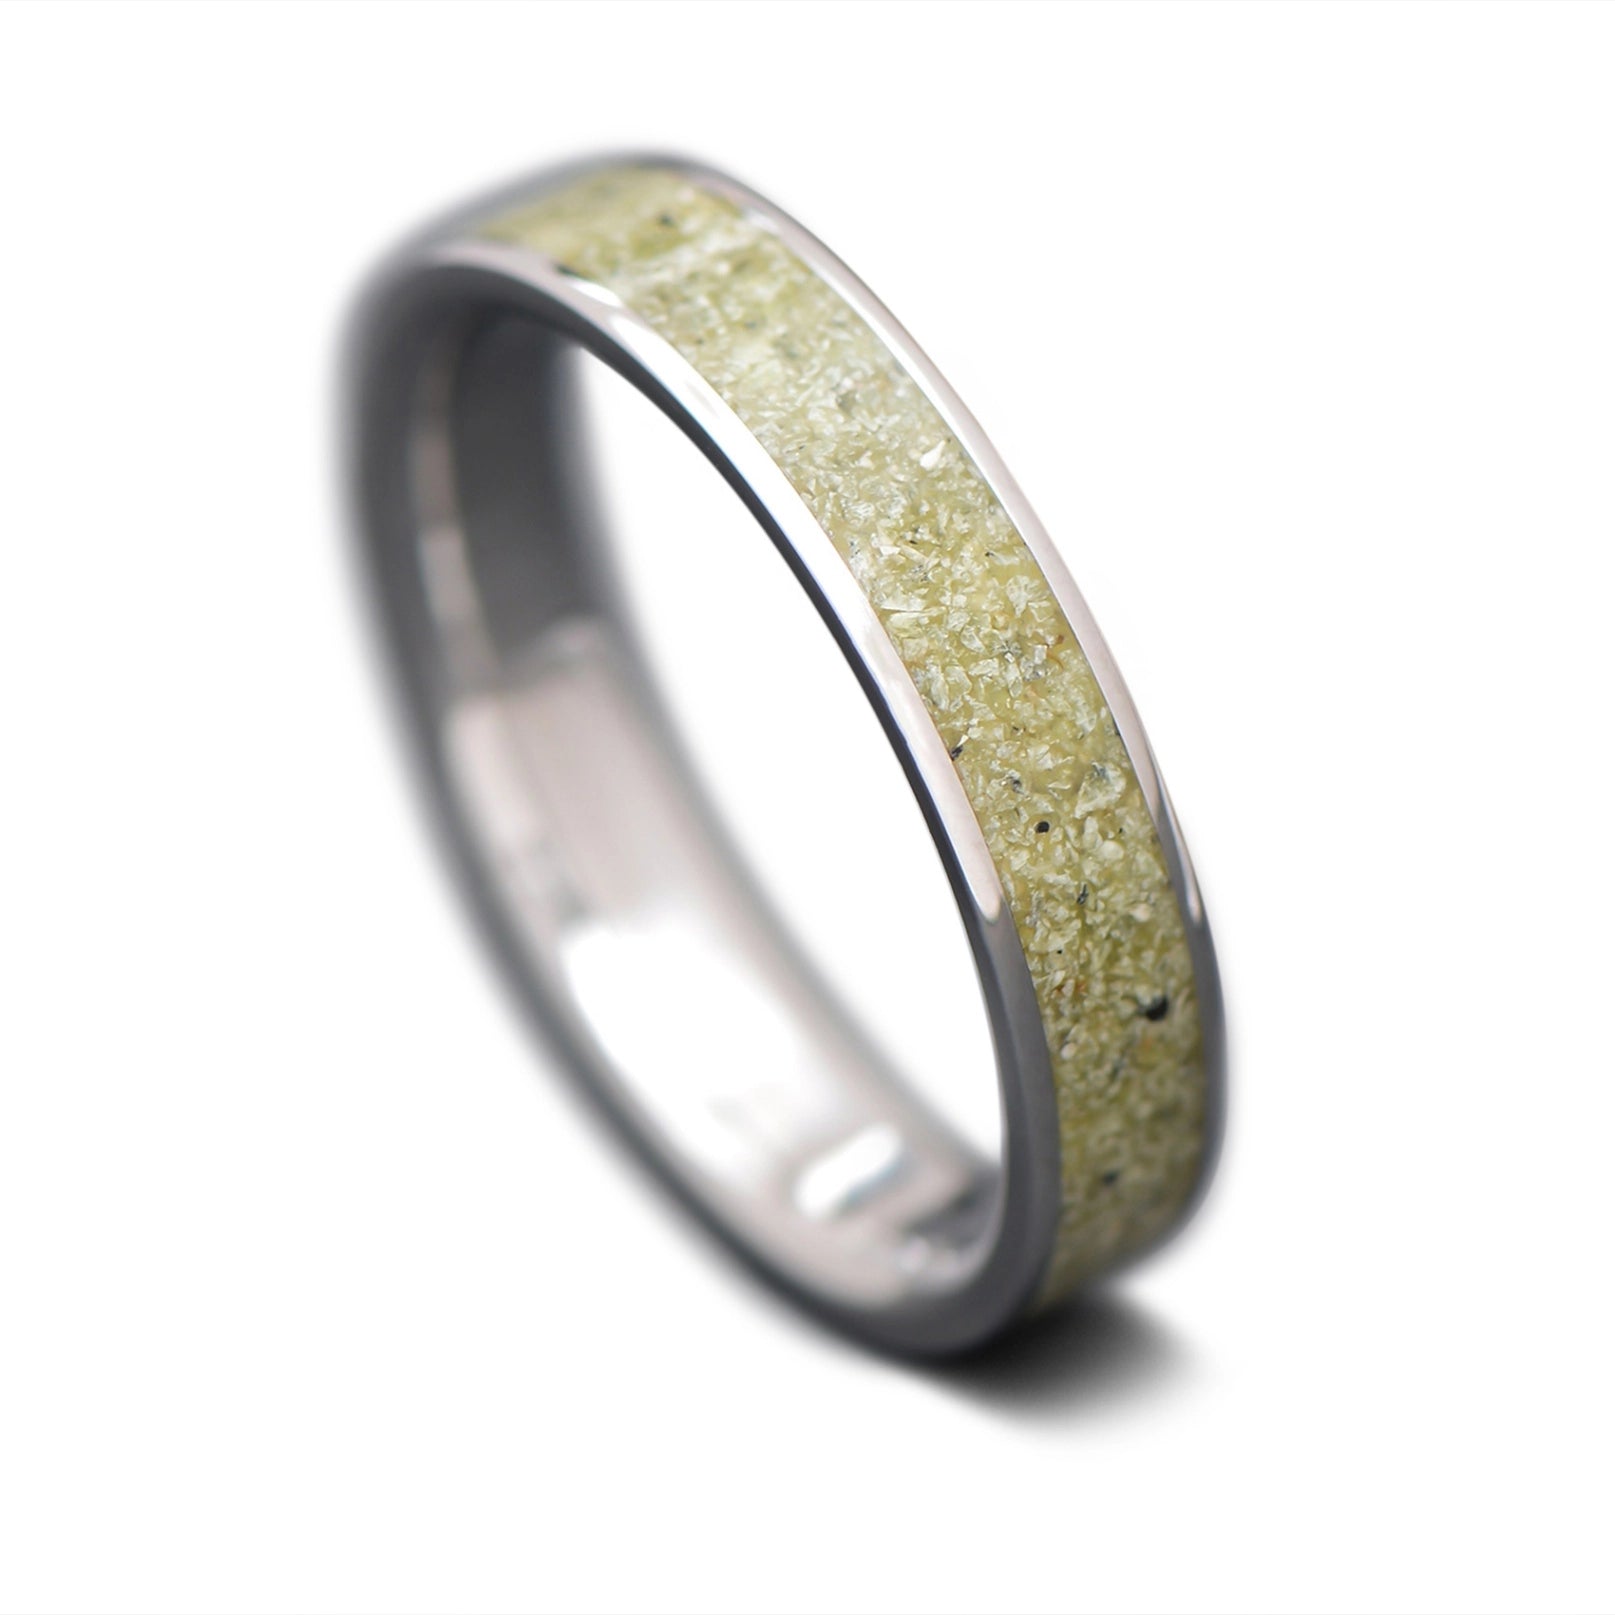  Titanium core ring with Jade inlay, 5mm -THE CORE